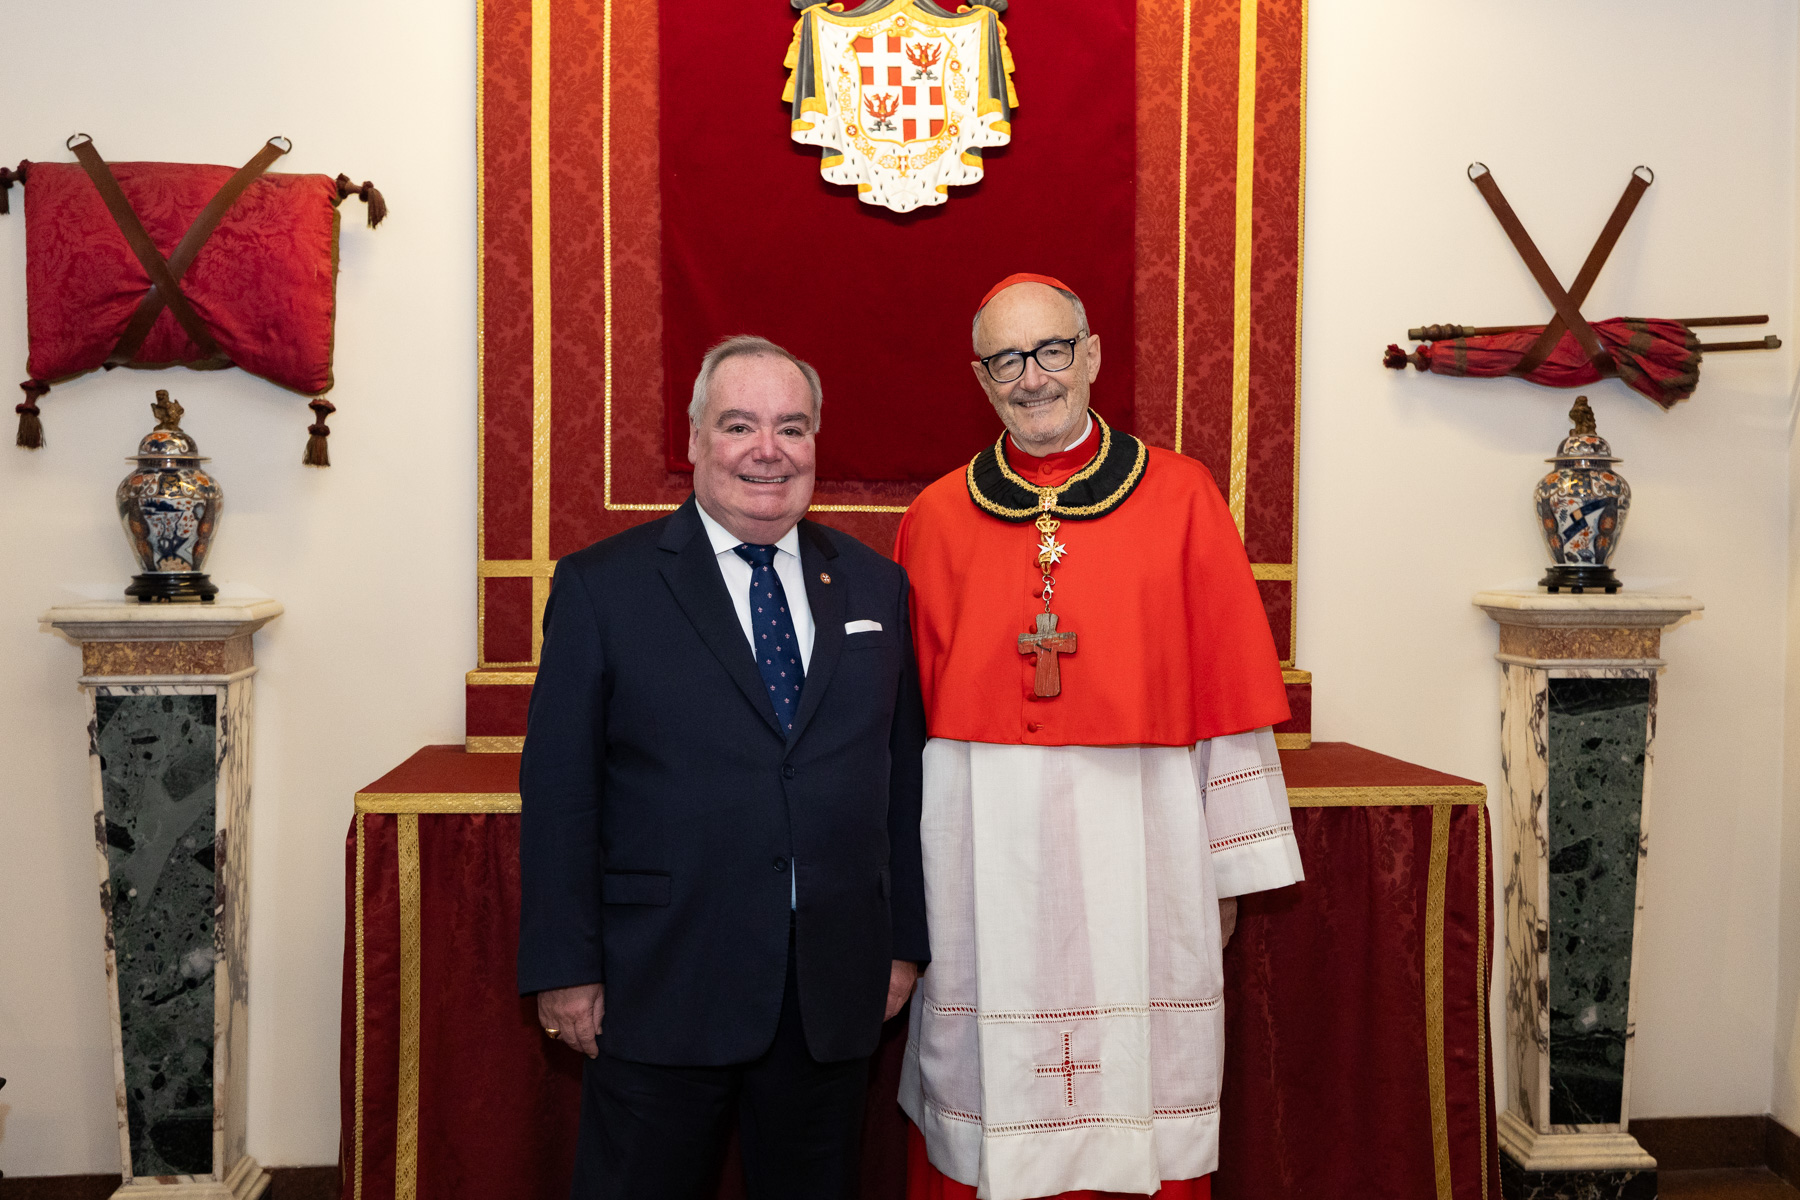 Cardinal Michael Czerny, S.J. Bailiff Grand Cross of Honour and Devotion of the Order of Malta